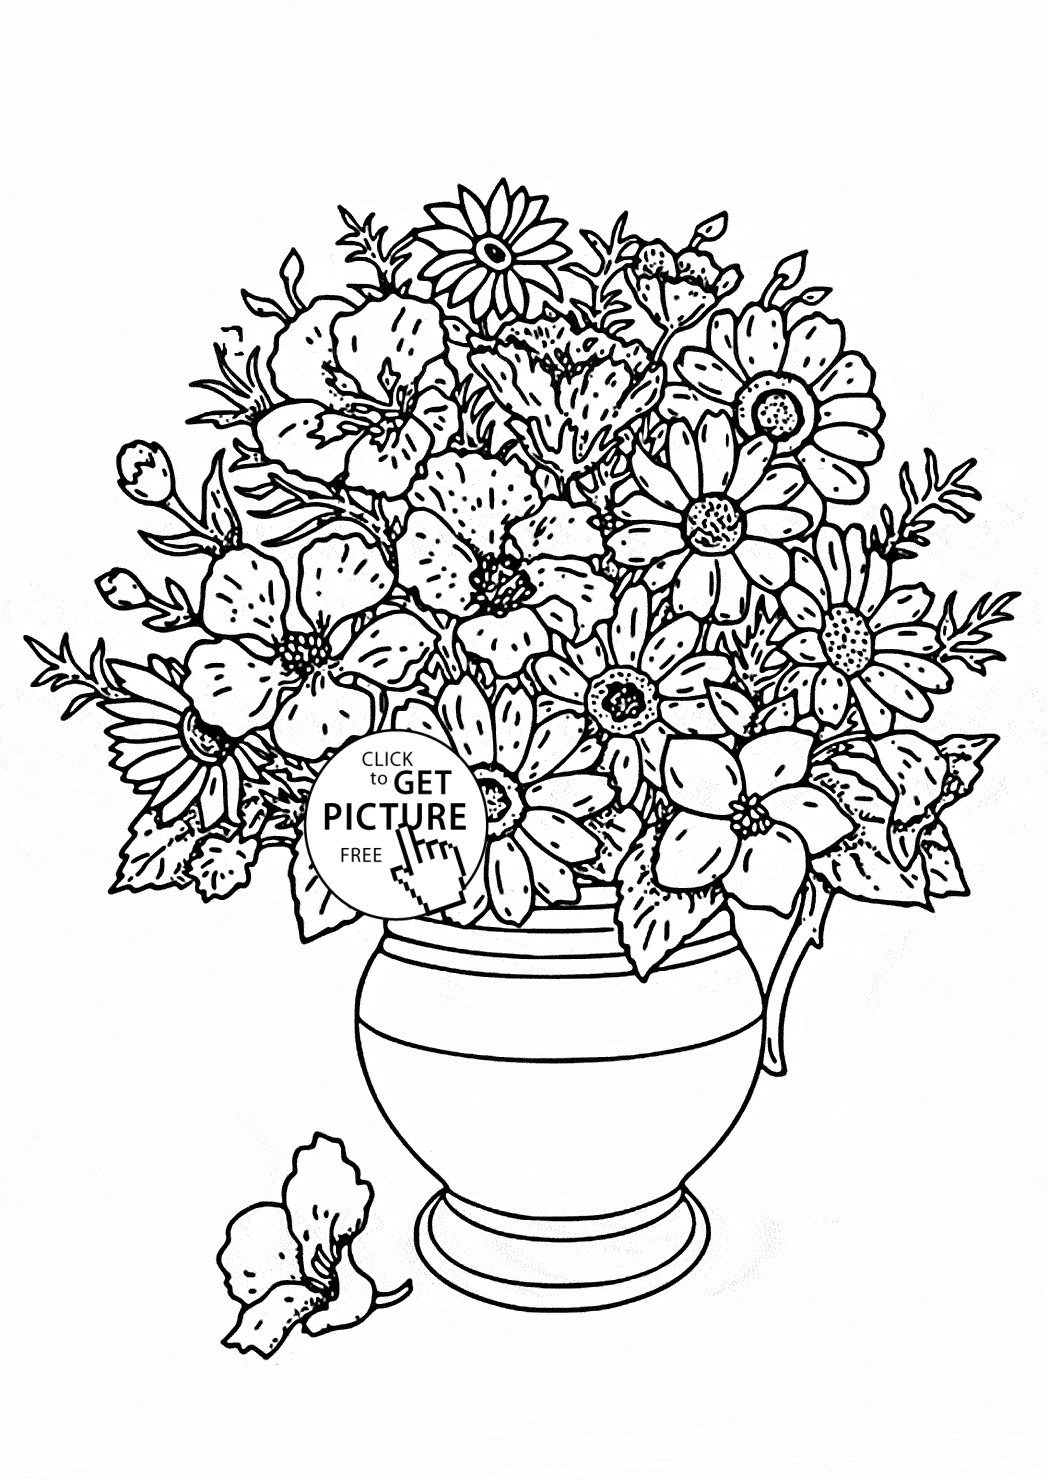 Free Vase And Flowers Coloring Page, Download Free Vase And ...